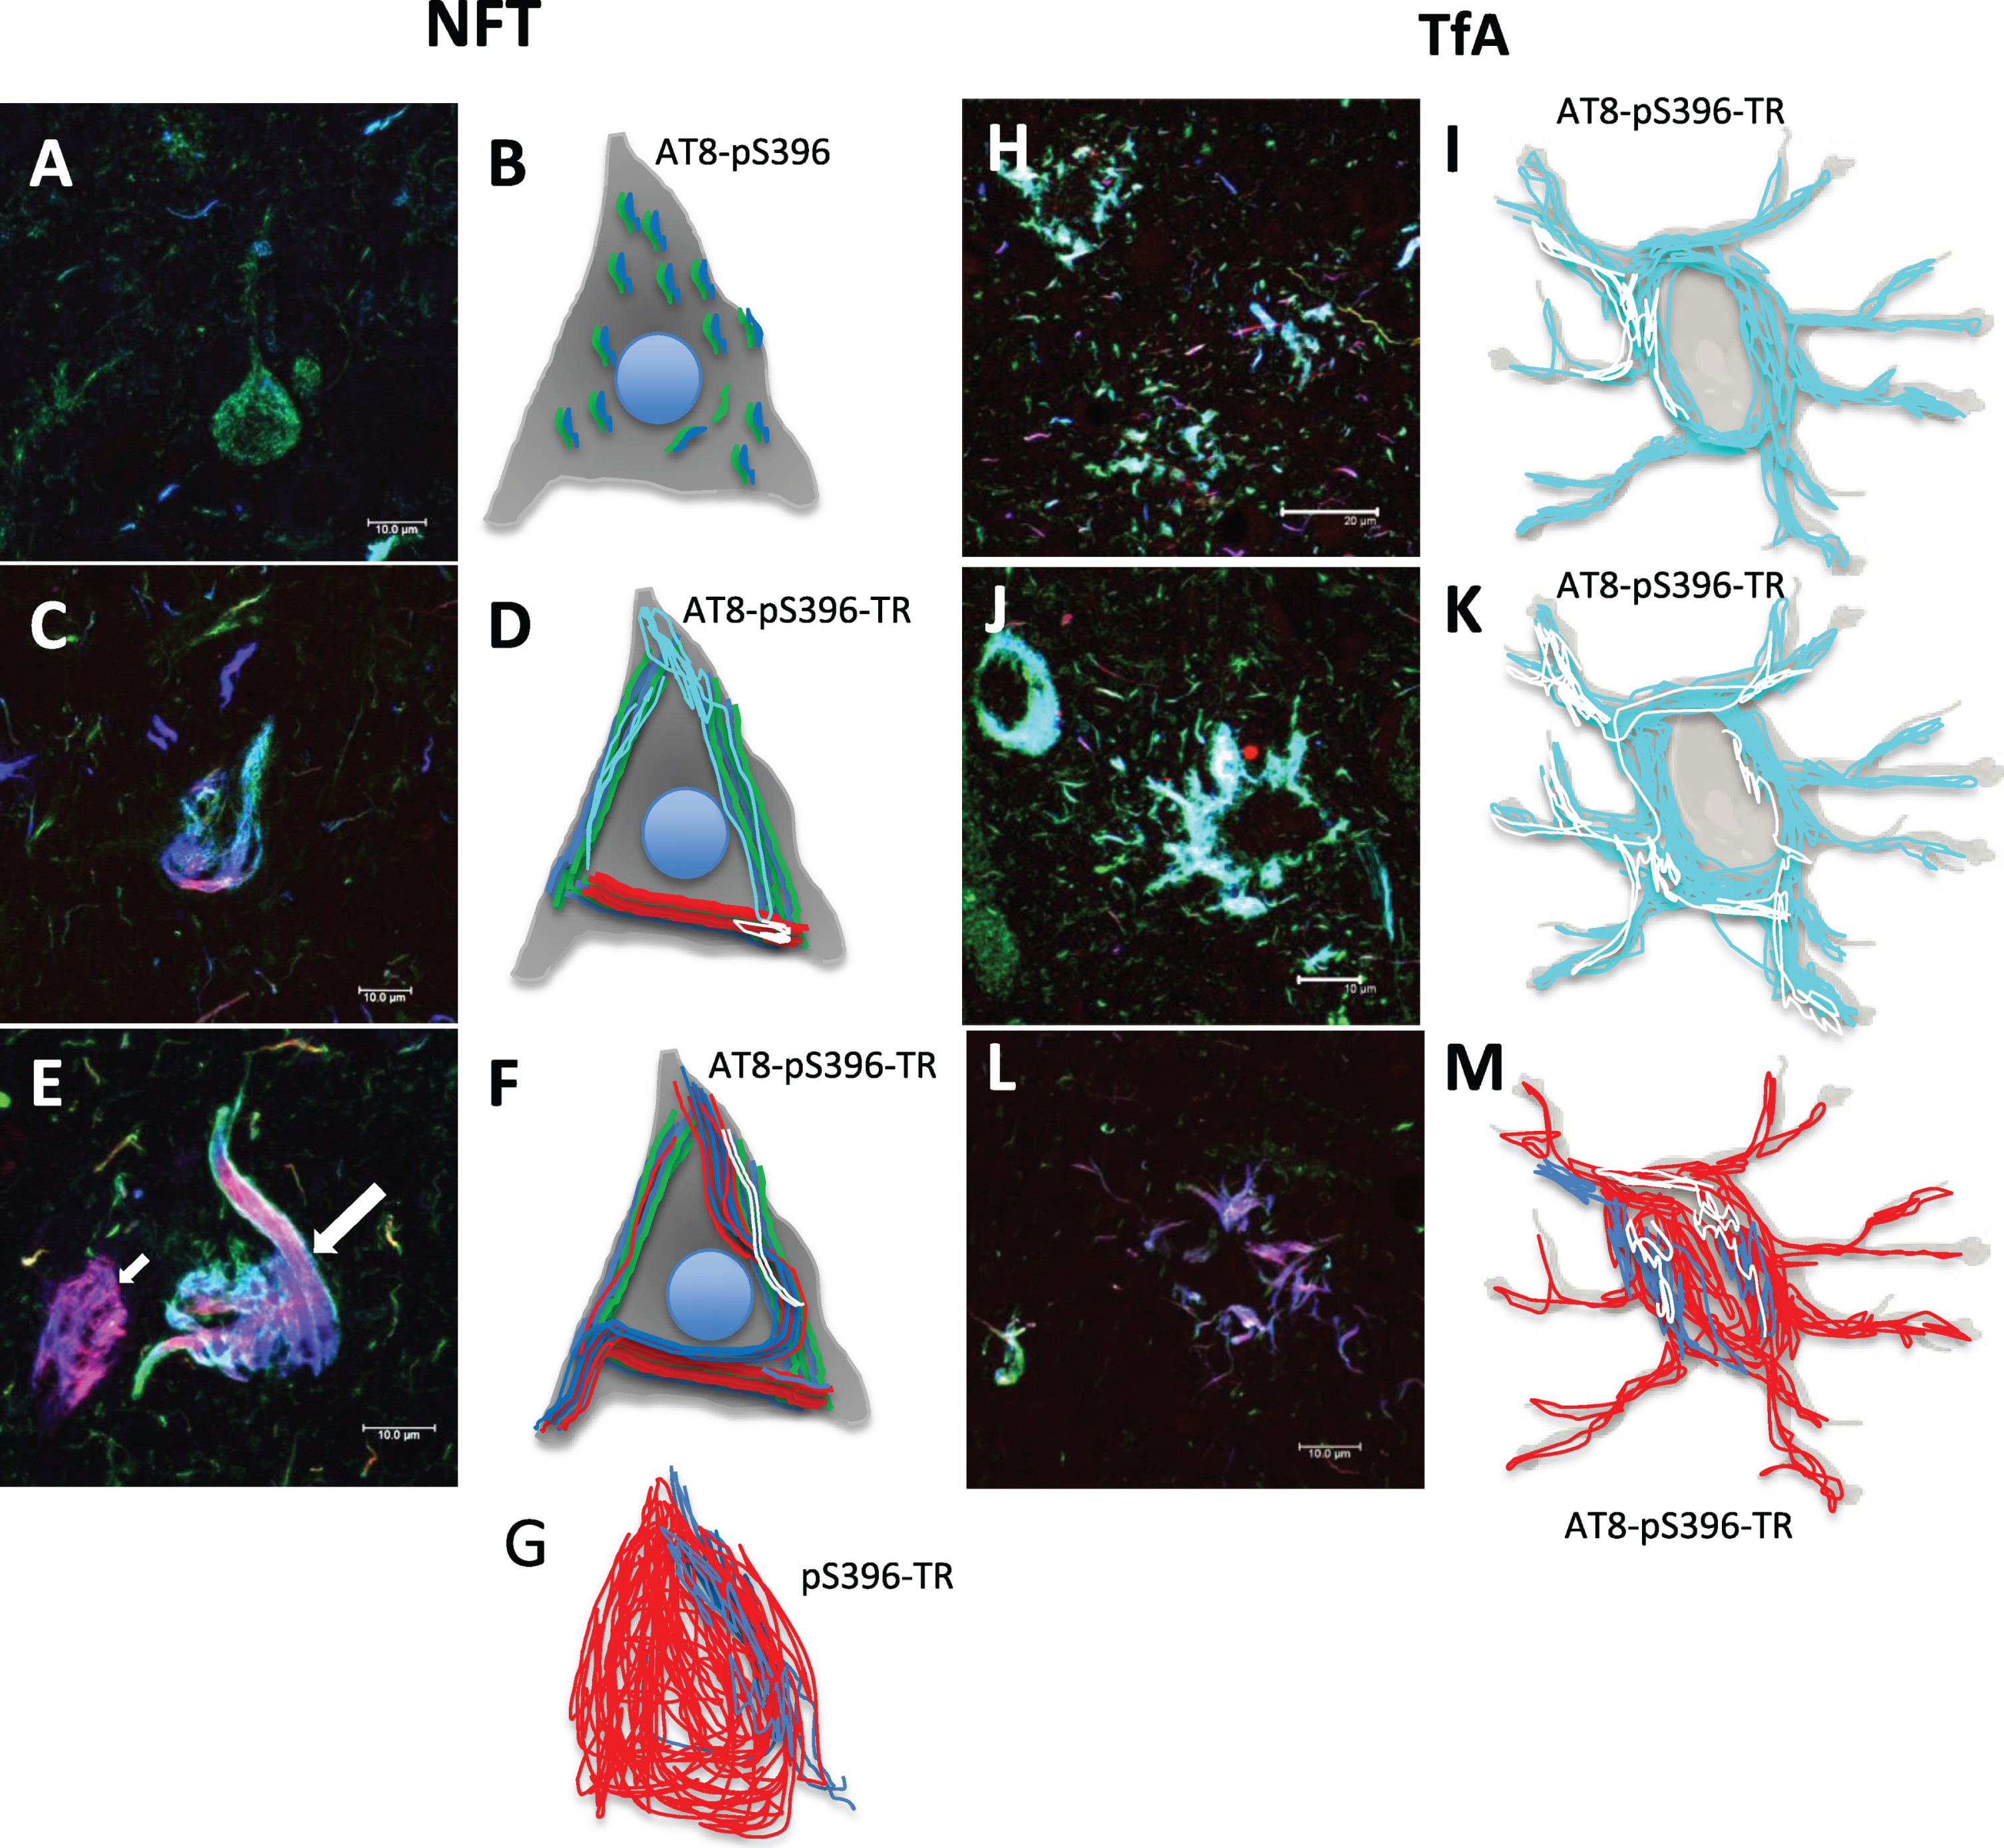 Schematic representation of the tau aggregation process in neuronal and glial degeneration in PSP. A-G) Neuronal degeneration, H-M) Glial degeneration. A) Neurofibrillary pre-tangle. B) Representation showing a staining of small fibrils positive to the AT8 and pS396 antibodies and distributed throughout the neuronal soma. C, D, F. Arrow) Representation of different tau aggregation events, positive for TR and colocalizing to varying degrees with AT8 and pS396 antibodies. E, G) NFT populations were recognized by TR and partially by the pS396 antibody. H, I, J, K) Tau aggregation pattern in glial cells, which colocalize to varying extents for AT8 and pS396 antibodies. L, M) Glial cells were mostly TR-positive. Scale bars, 100 μm.